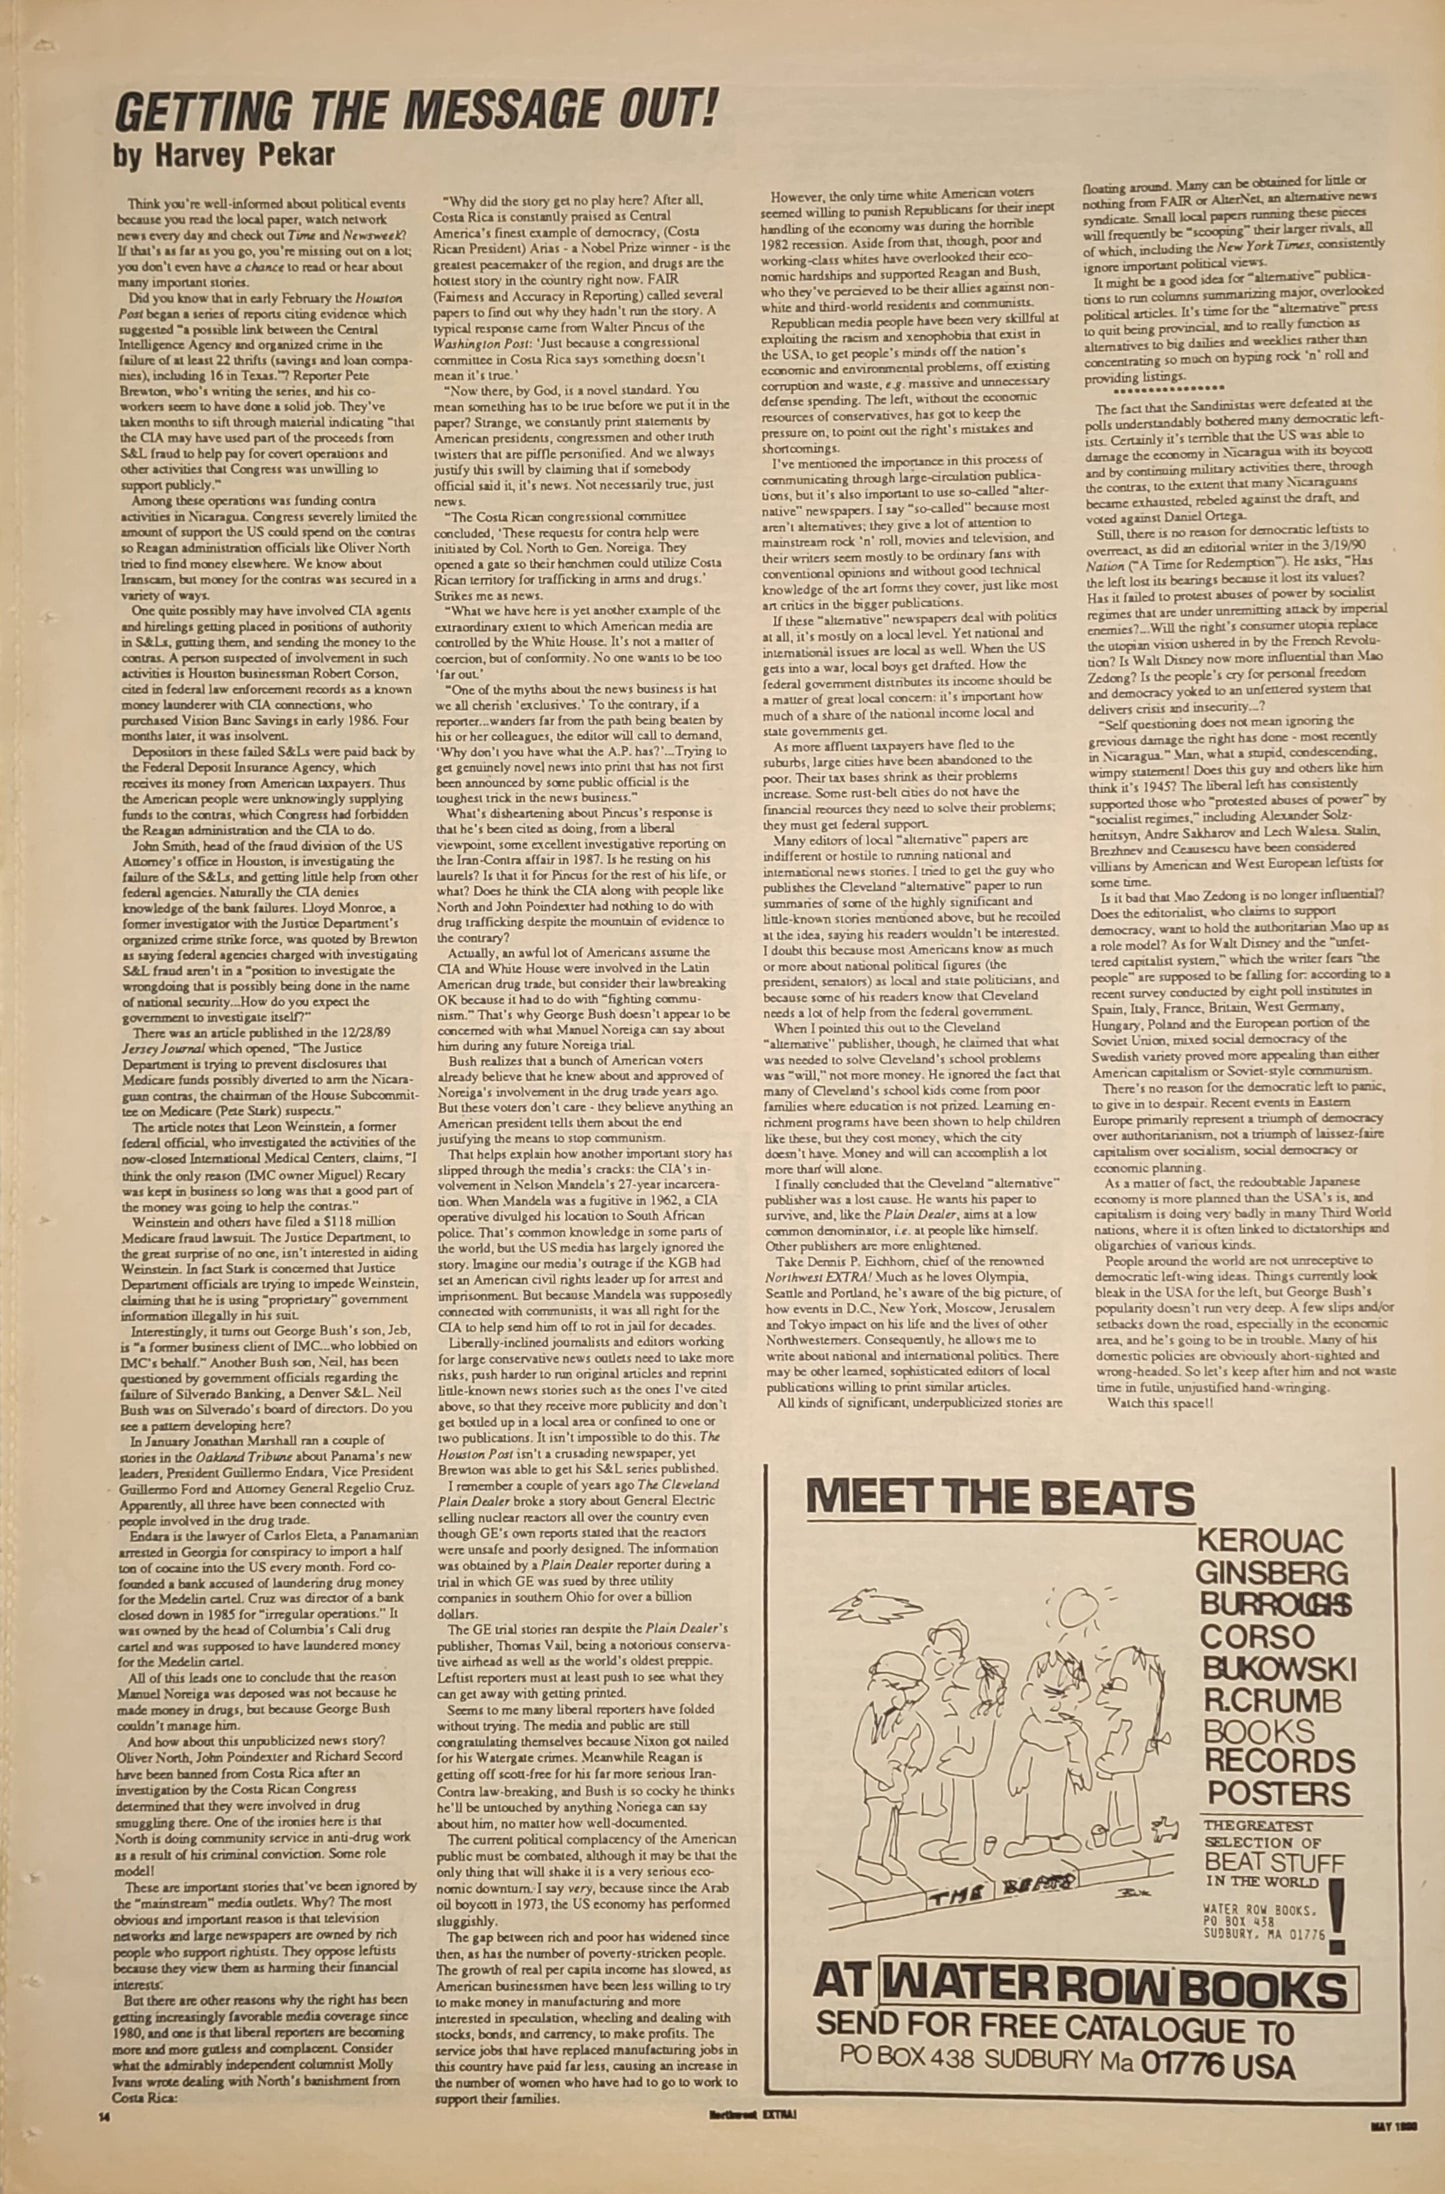 Northwest Extra! May 1990 UNFOLDED -- First Appearance Bukowski Poem, Plus Hunter S. Thompson. a lengthy piece by Harvey Pekar, and S. Clay Wilsom (1990)